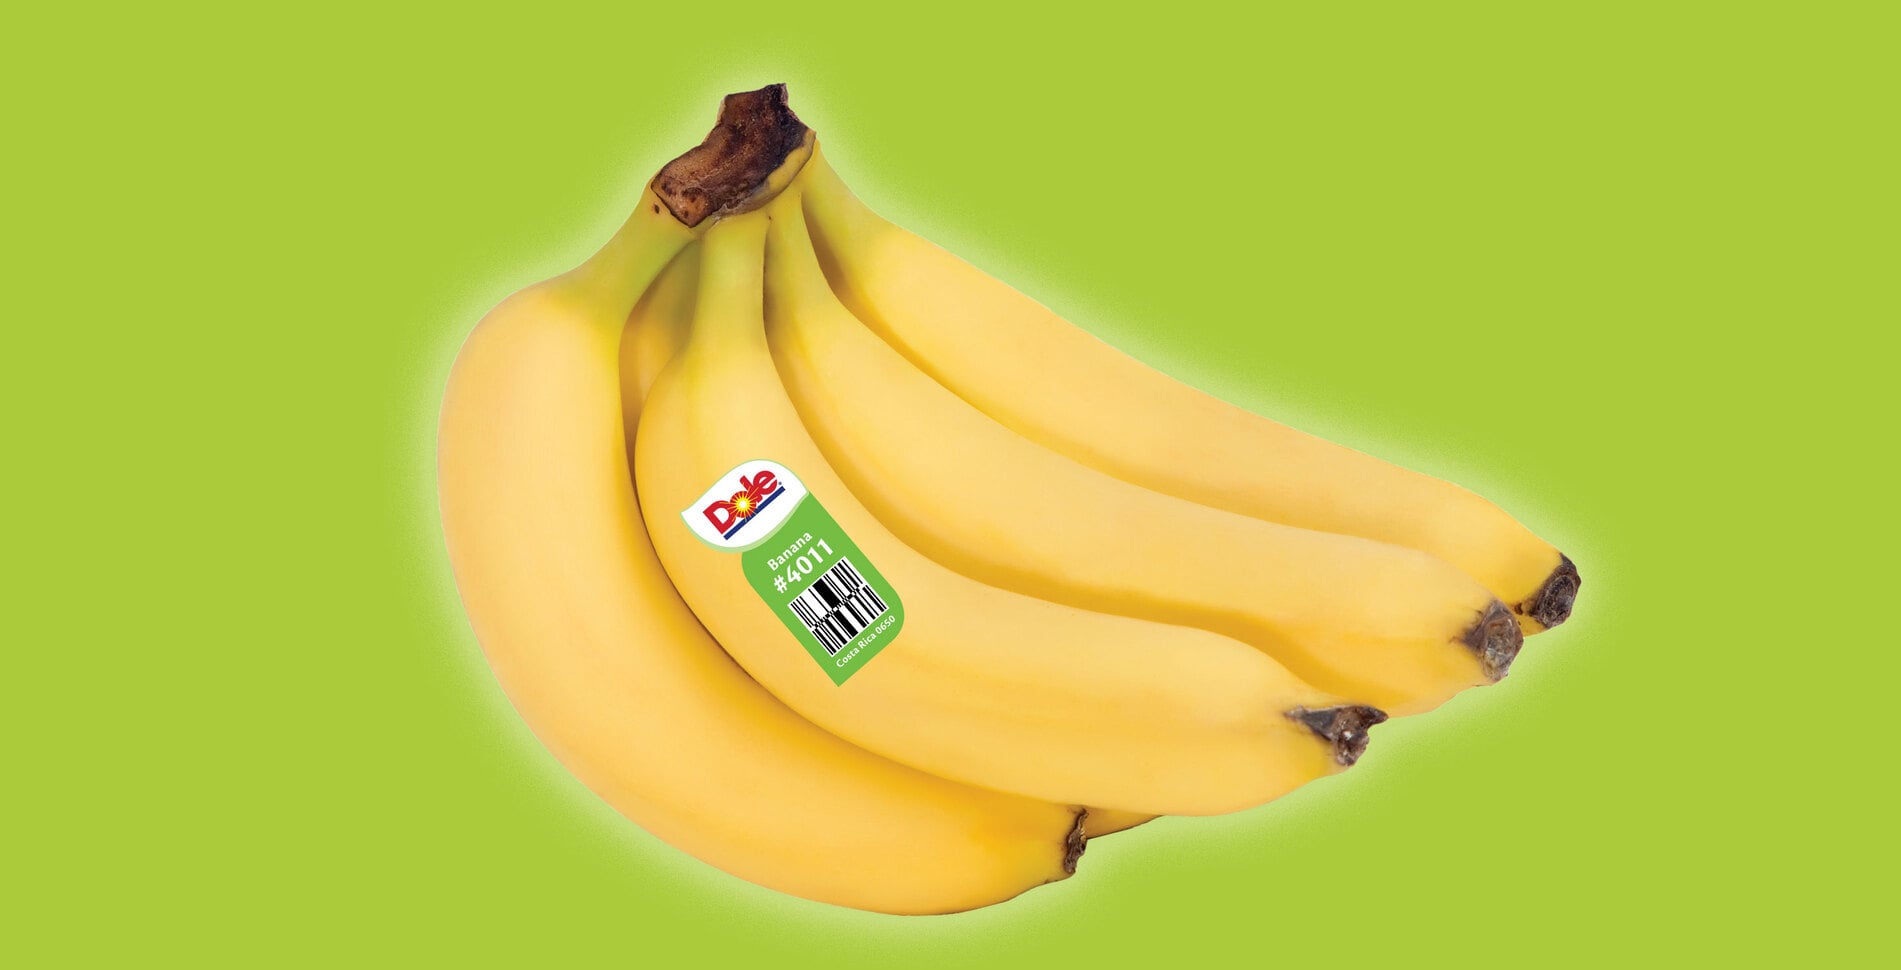 10 Things Dole Wants You to Know About Bananas on Its 125th Anniversary